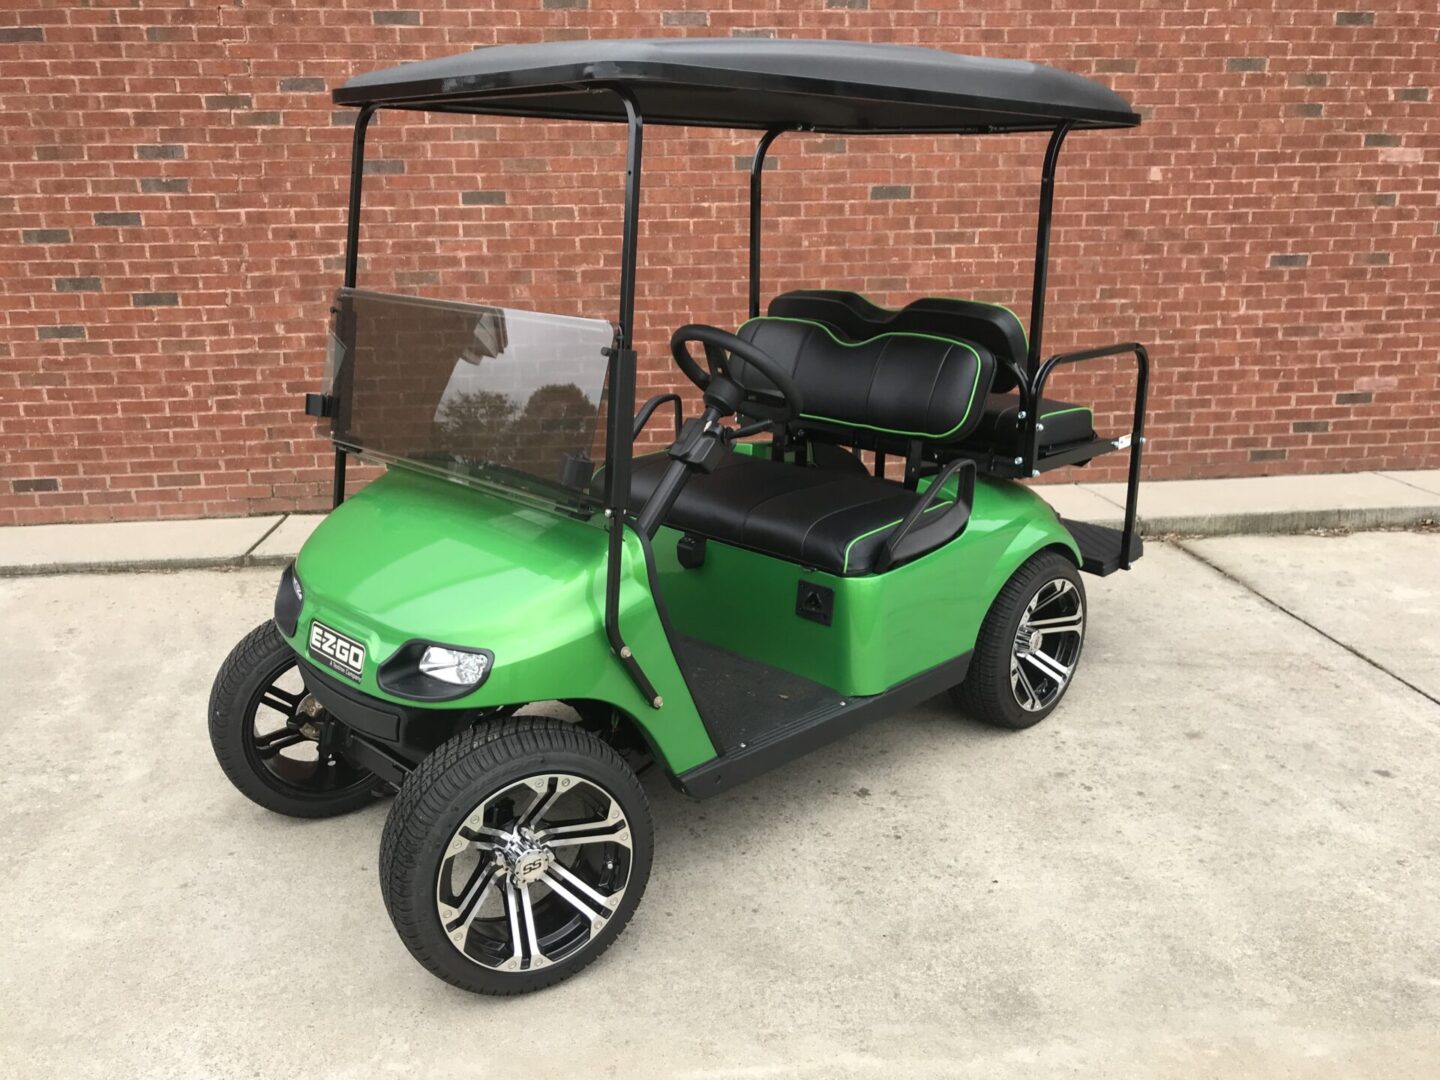 A green golf cart with black wheels parked in front of a brick wall.